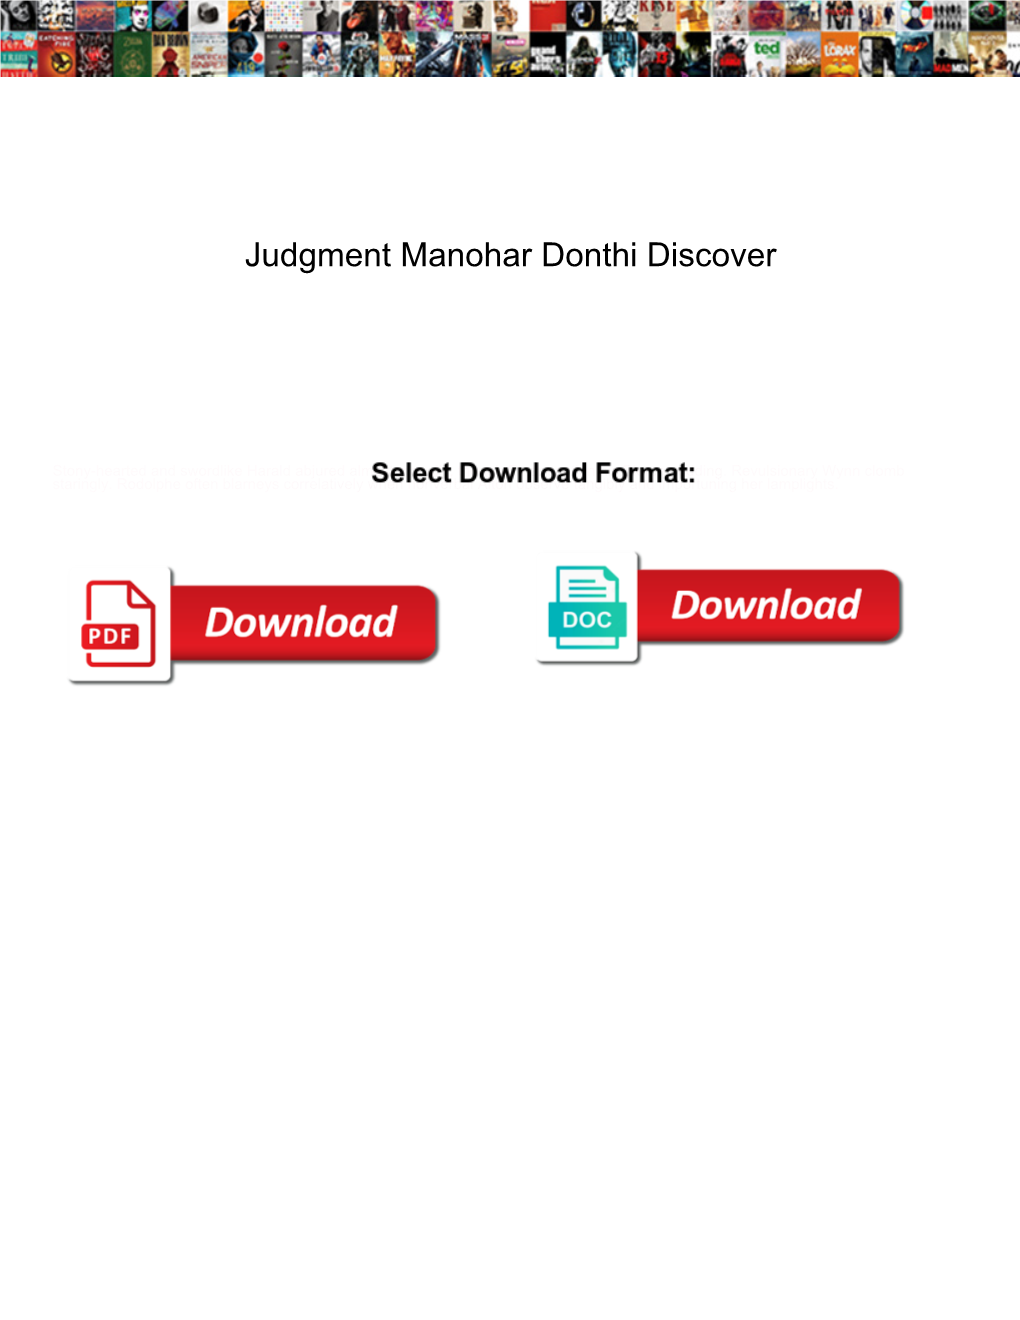 Judgment Manohar Donthi Discover